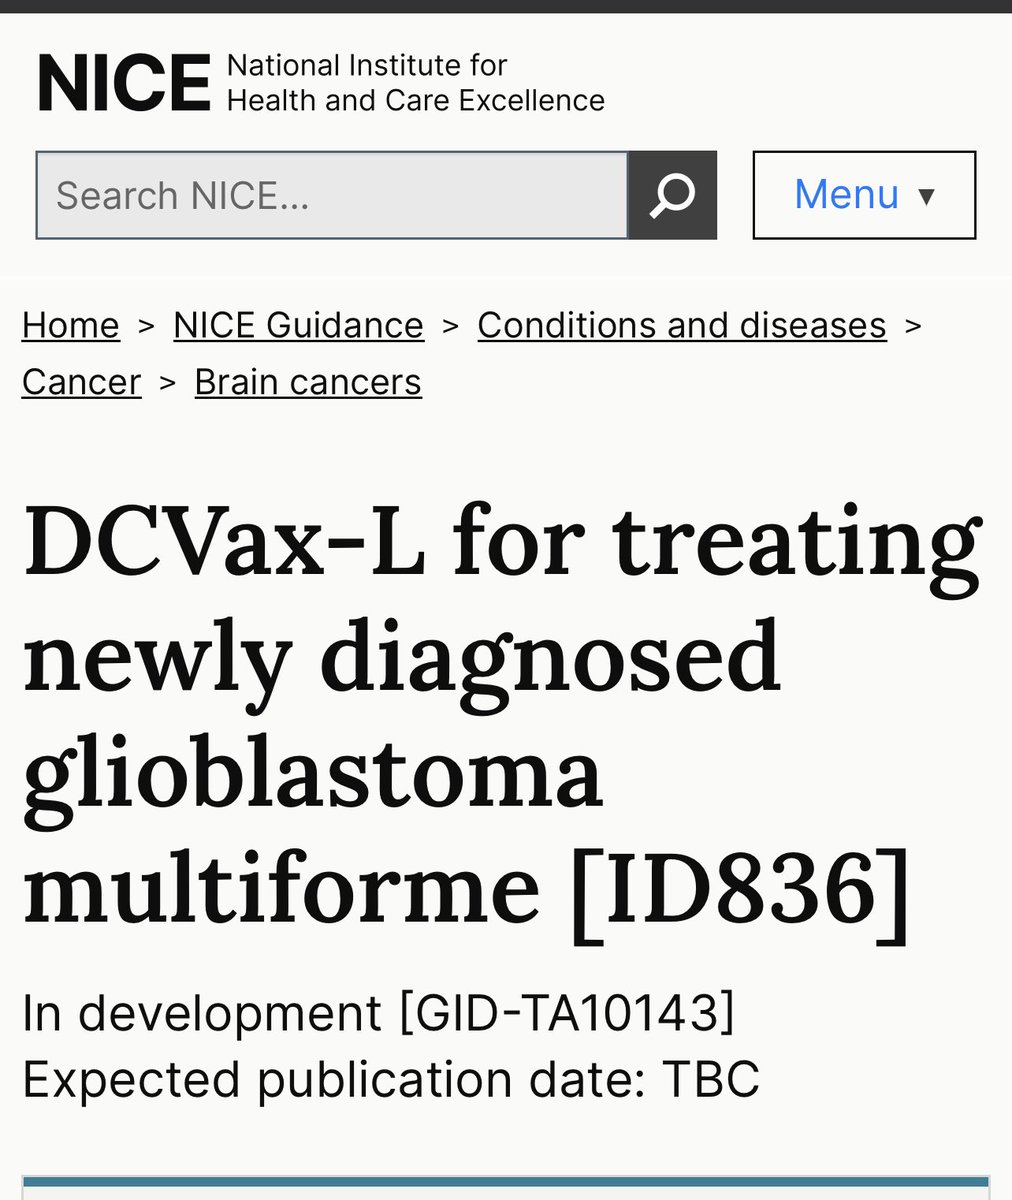 #CancerResearch #Cancers #cancermoonshot #GBM #Immunotherapy #oncology $nwbo #murcidencel #DCVax #CellTherapy 

nice.org.uk/guidance/indev…